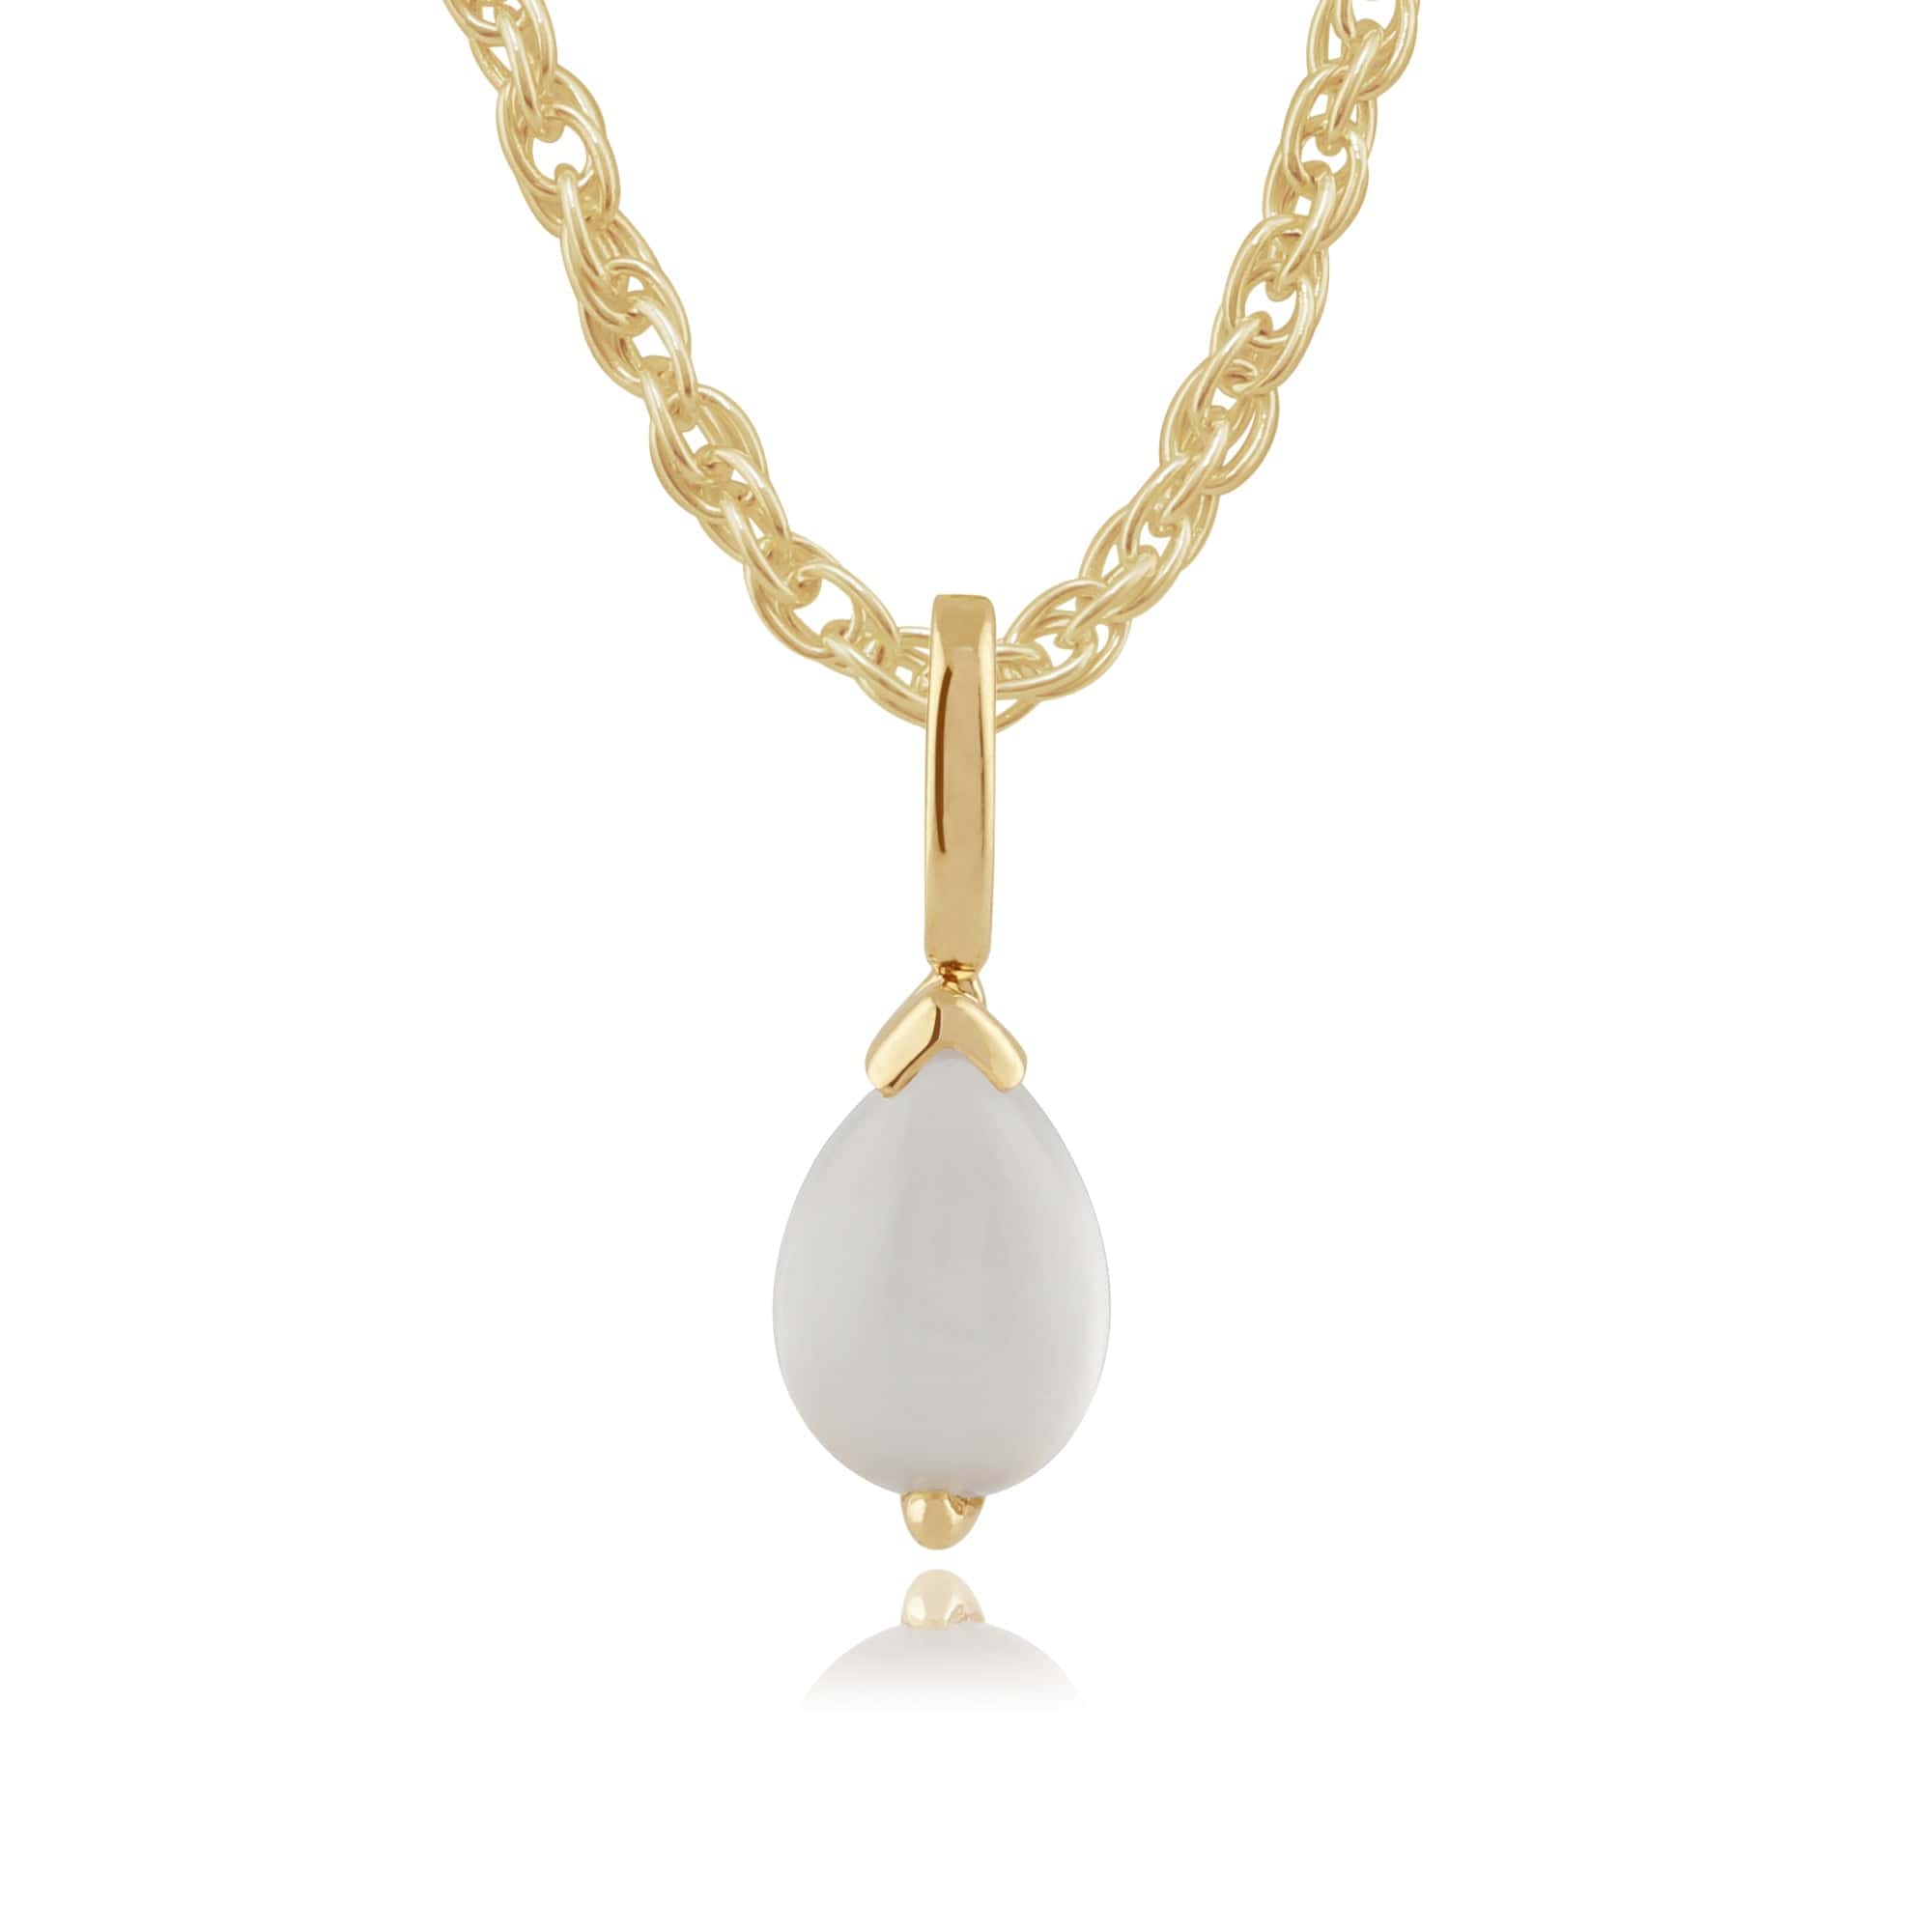 Photos - Pendant / Choker Necklace Classic Pear Moonstone Pendant in 9ct Yellow Gold